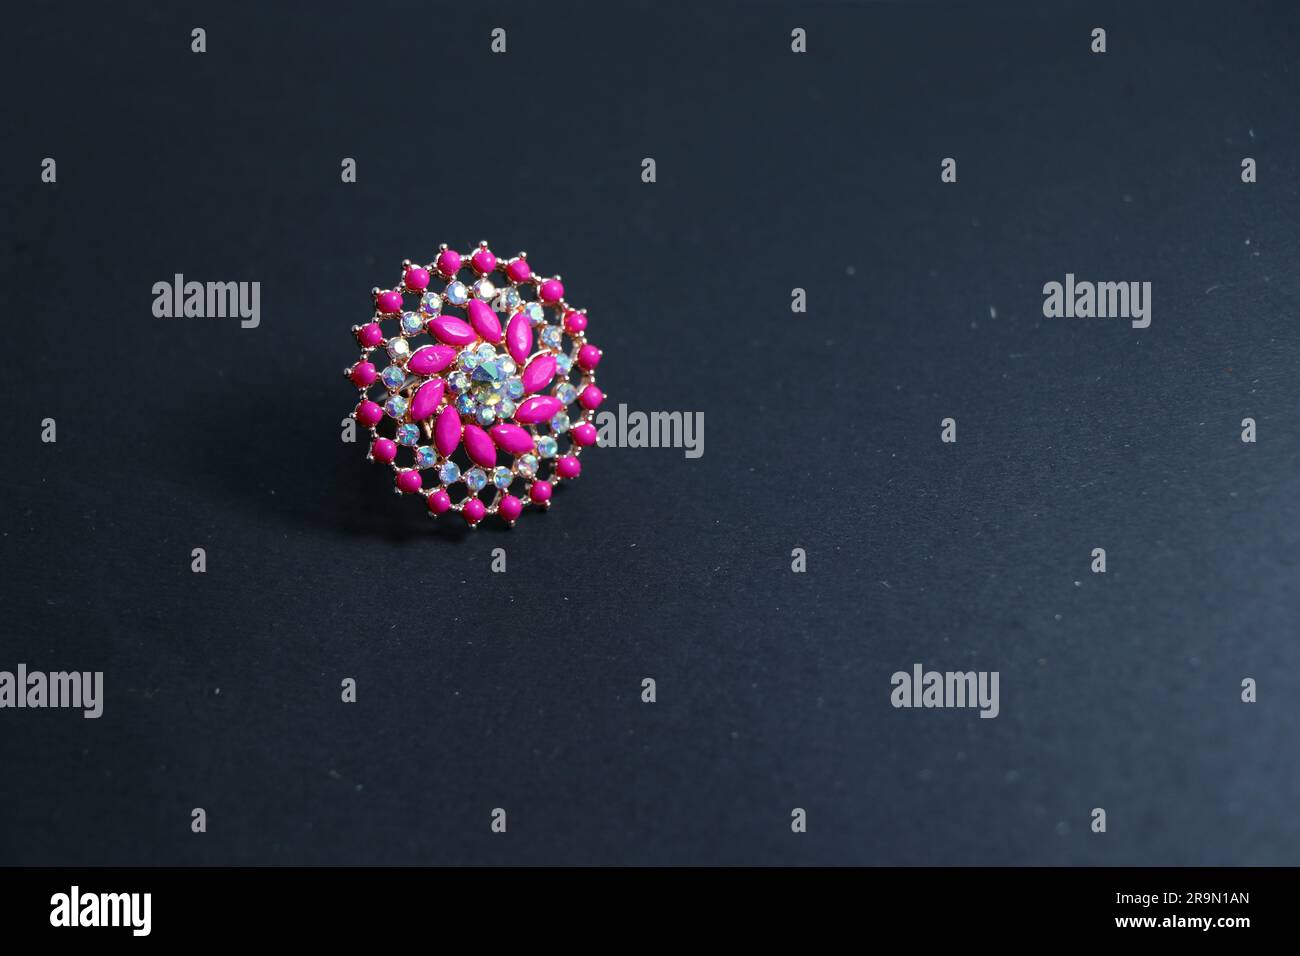 Elegance Refined: Pink Stone Silver Ring on a Black Canvas - A Captivating Stock Image for Online Delights! Stock Photo